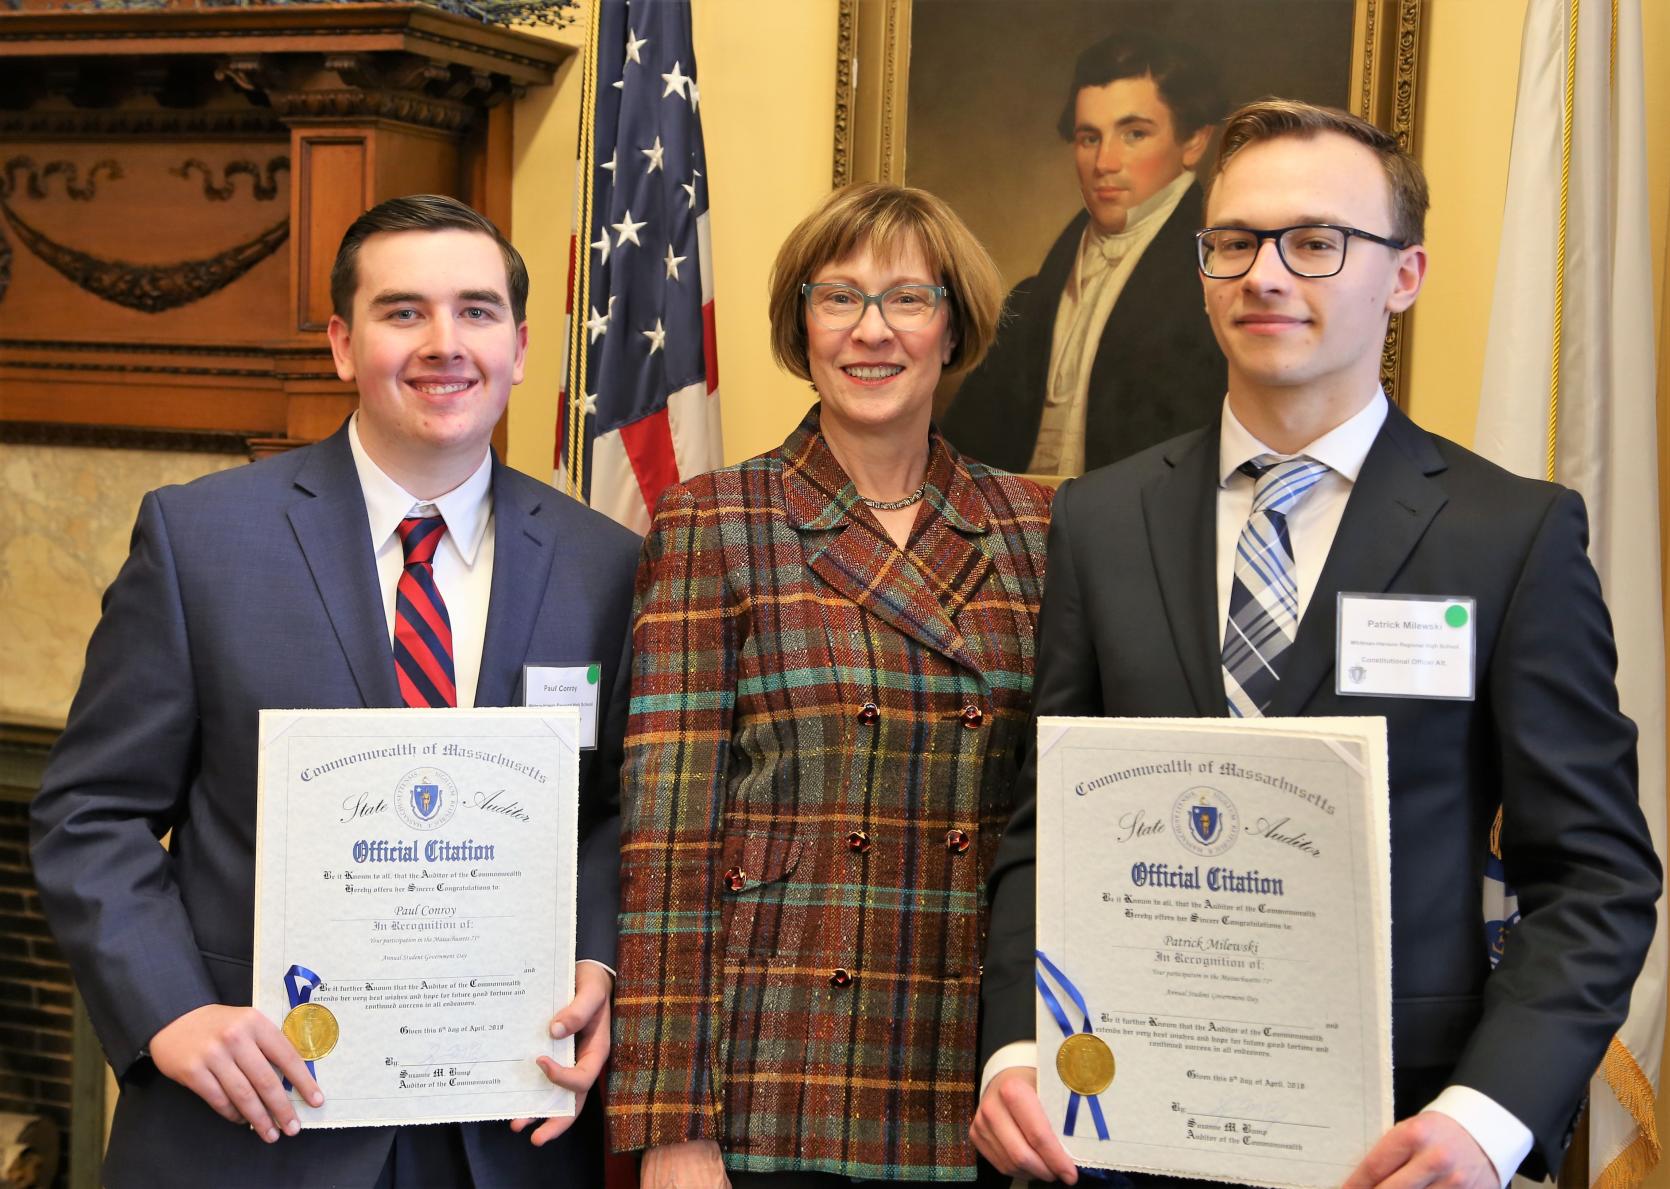 State Auditor Suzanne M. Bump recently presented Paul Conroy (left) and Patrick Milewski (right) with citations for their participation in the 71st annual Student Government Day at the State House. 